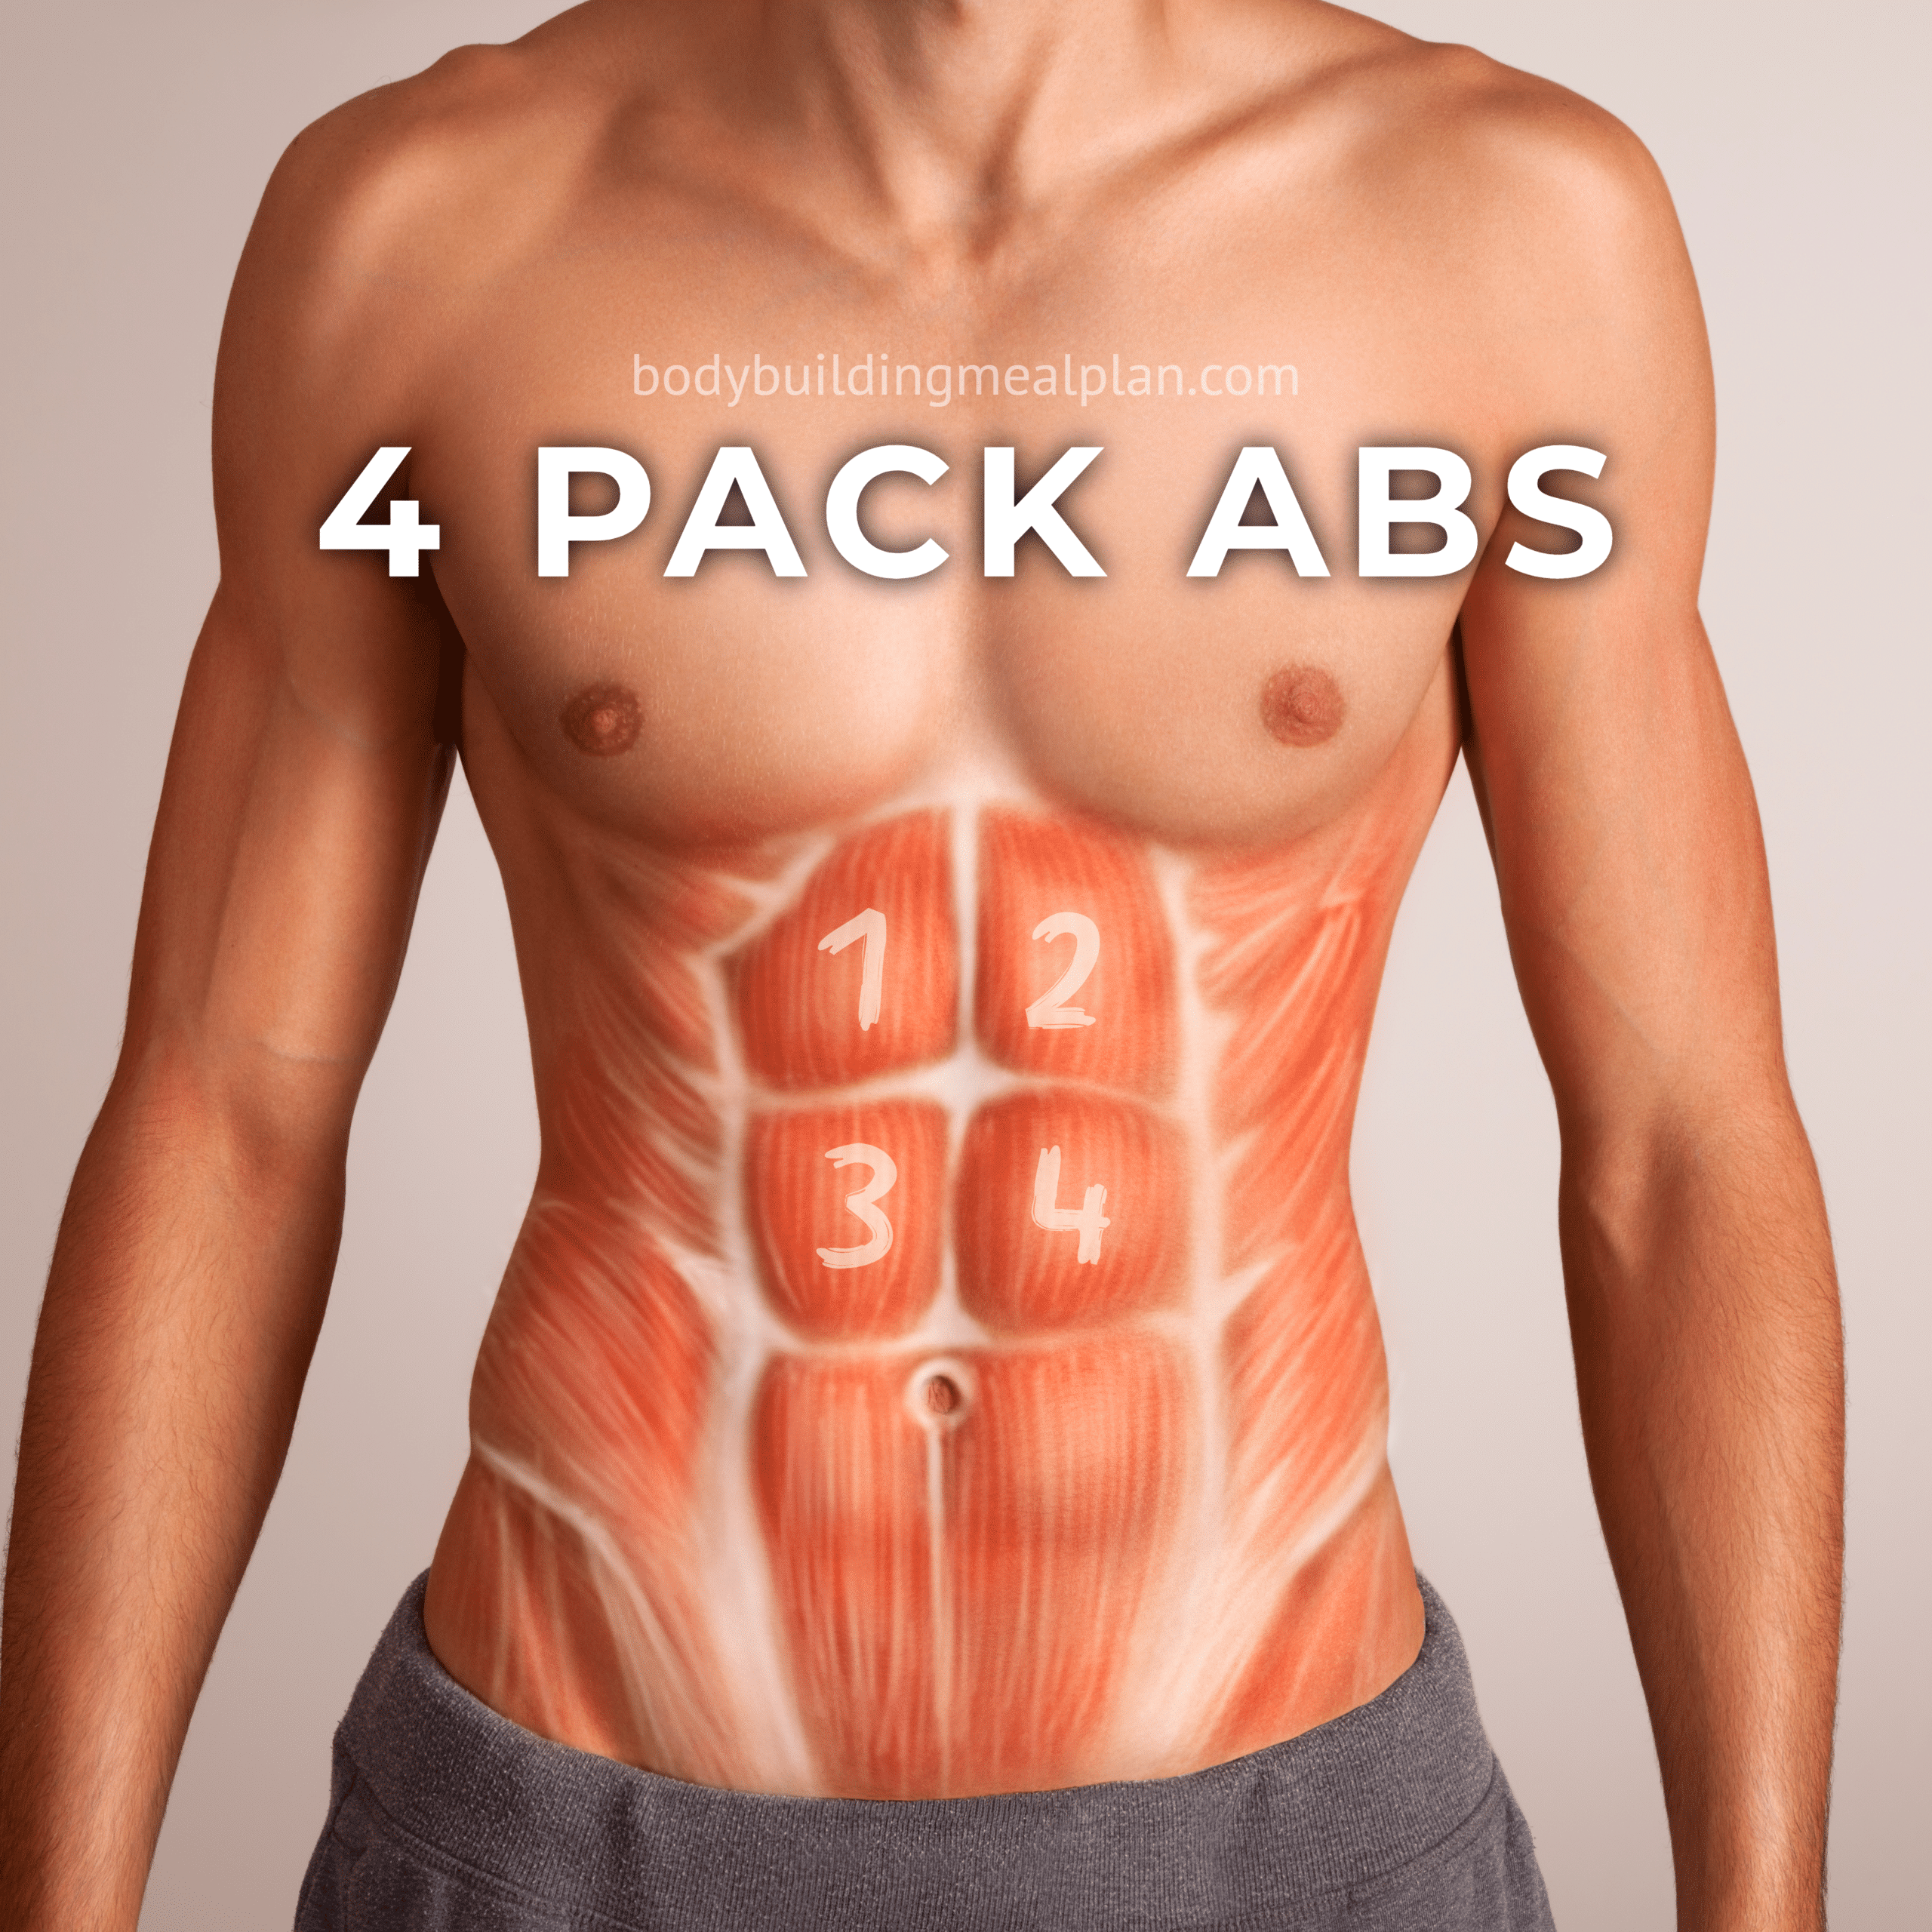 6 PACK ABS For Beginners You Can Do Anywhere - YouTube